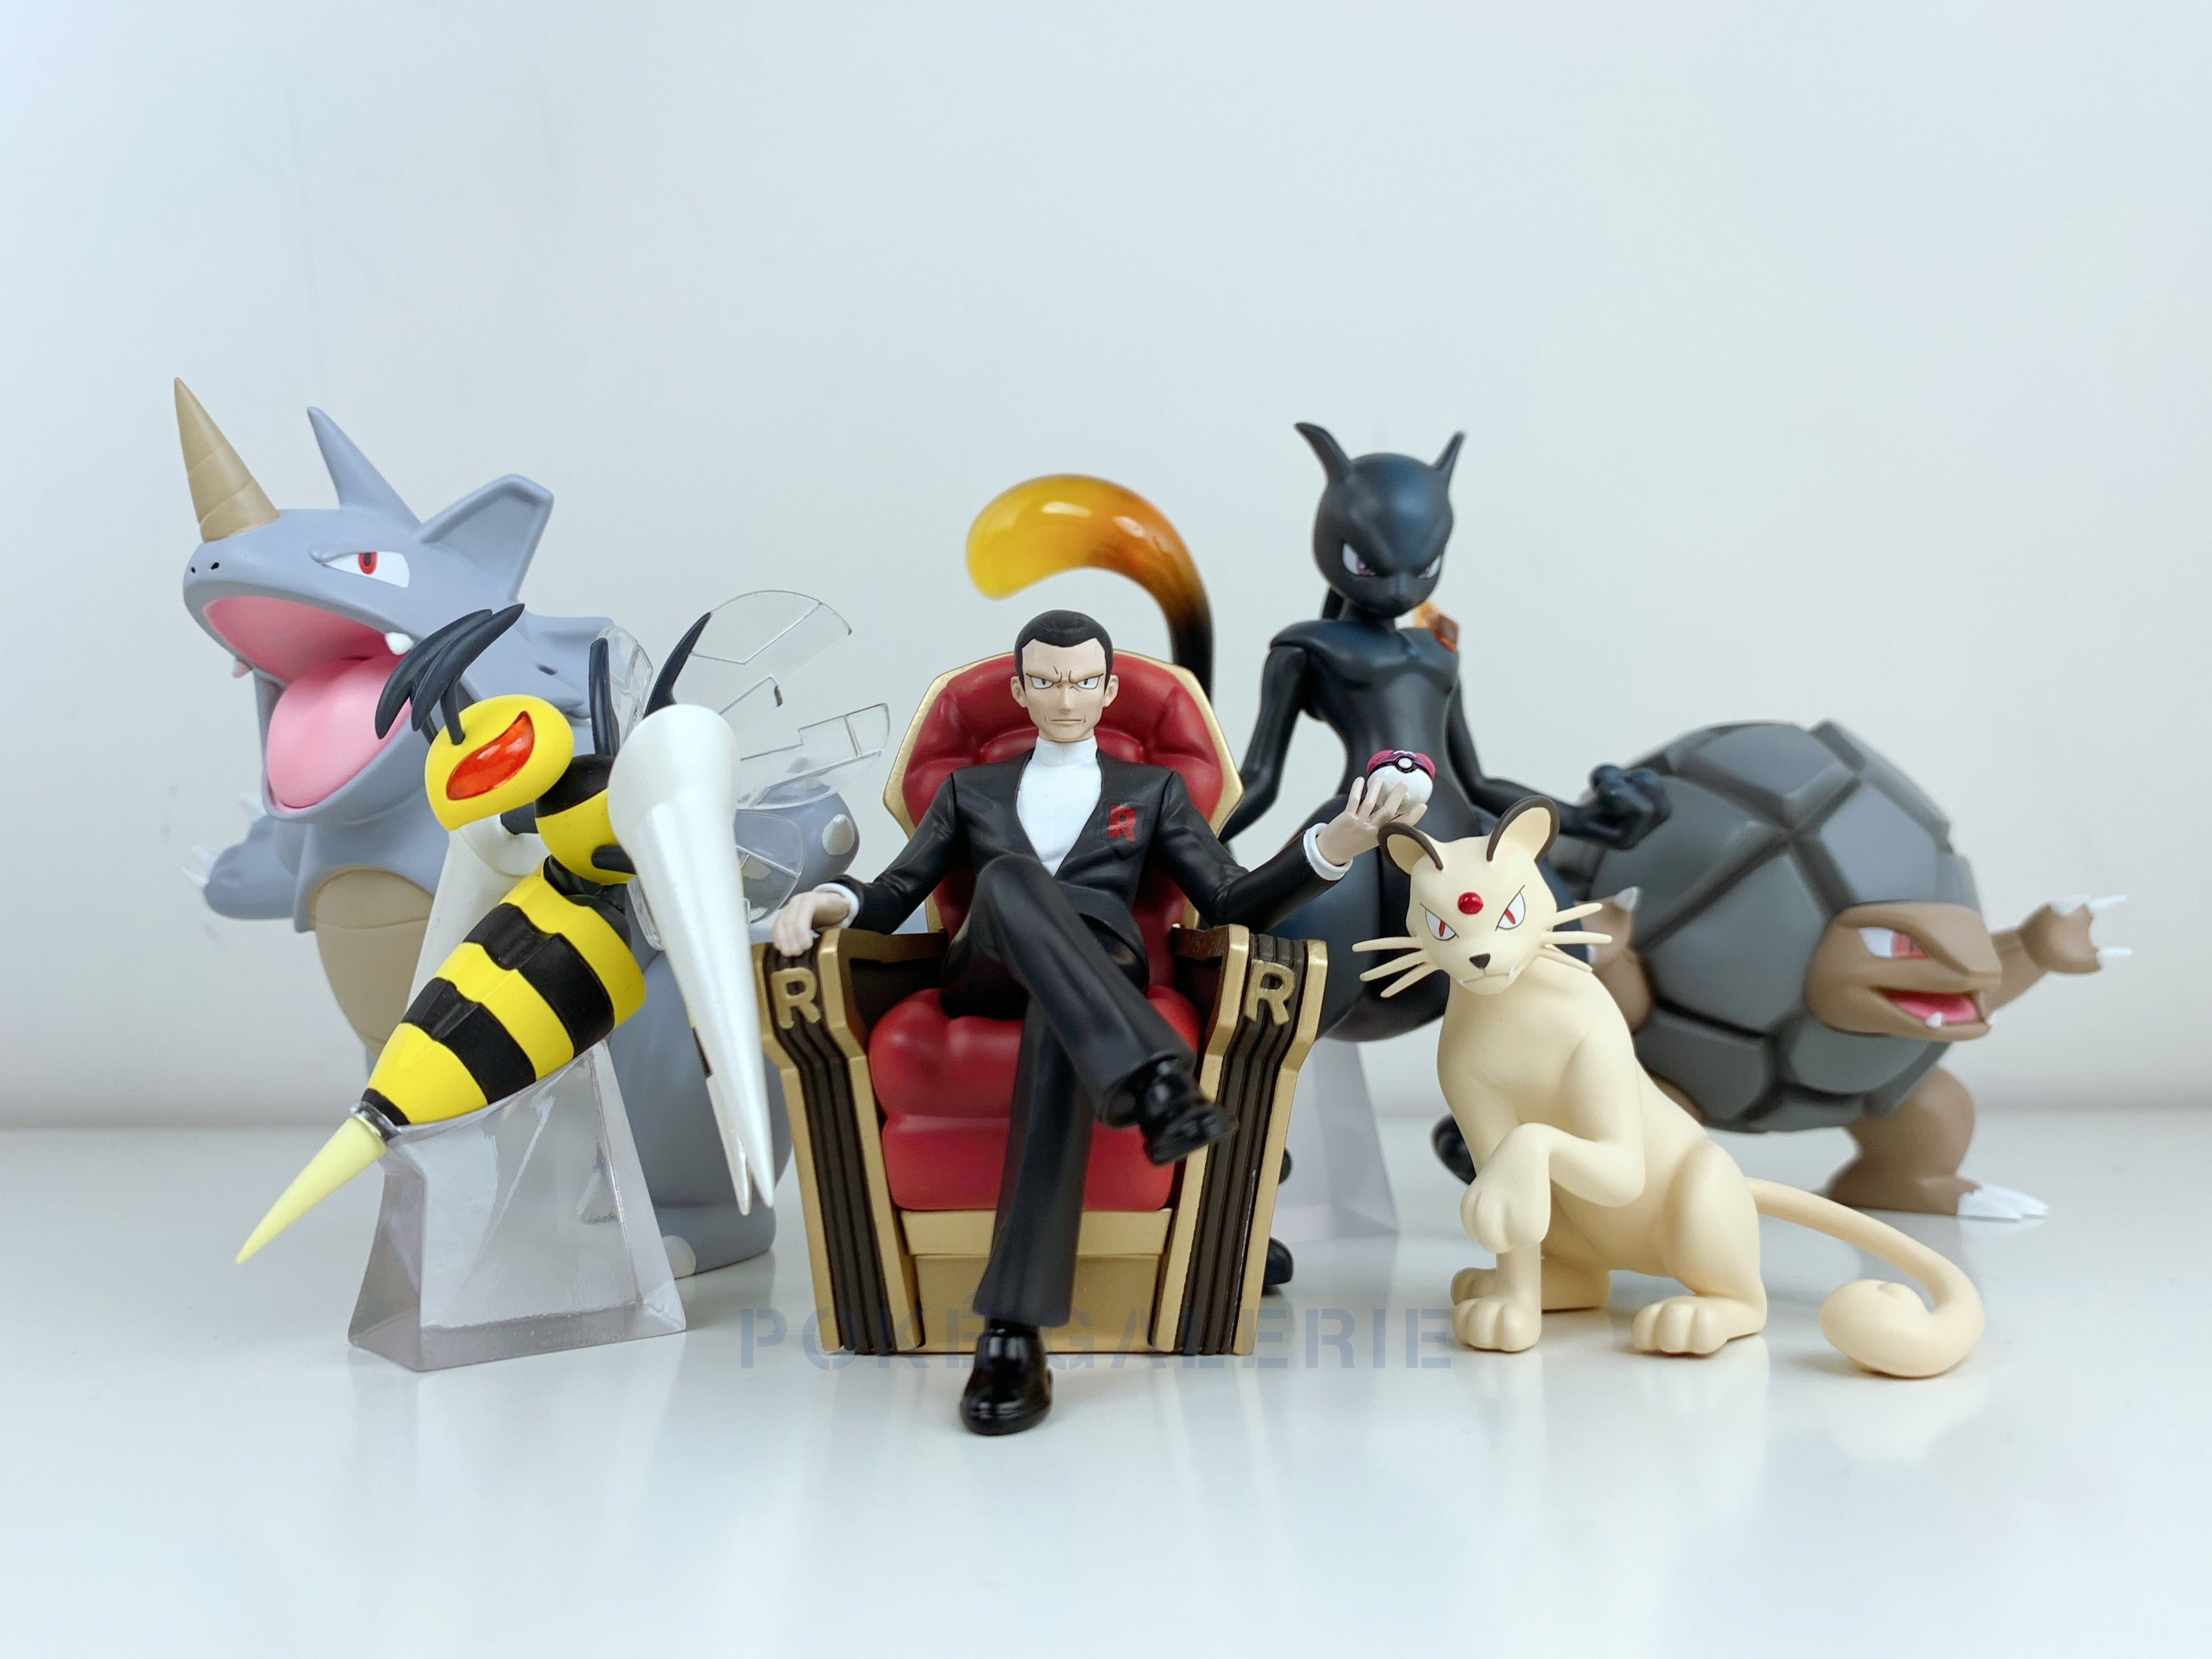 IN STOCK] 1/20 Scale World Figure [TRAINER HOUSE] - Onix – POKÉ